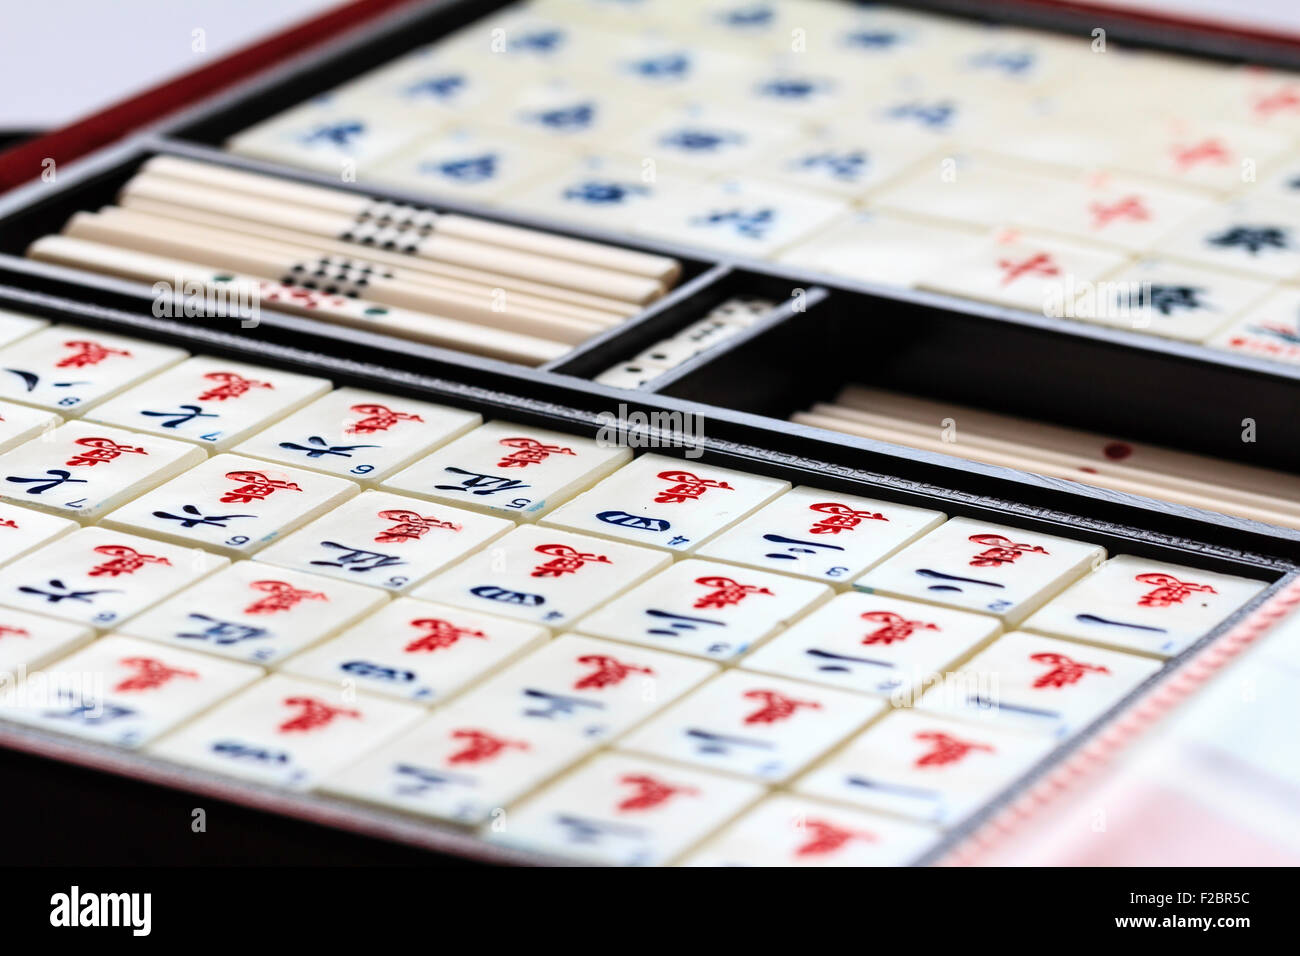 Mahjong, Mah jongg gambling open box, with contents displayed, various tile or card suits, sets arranged by number on plain white background Stock Photo